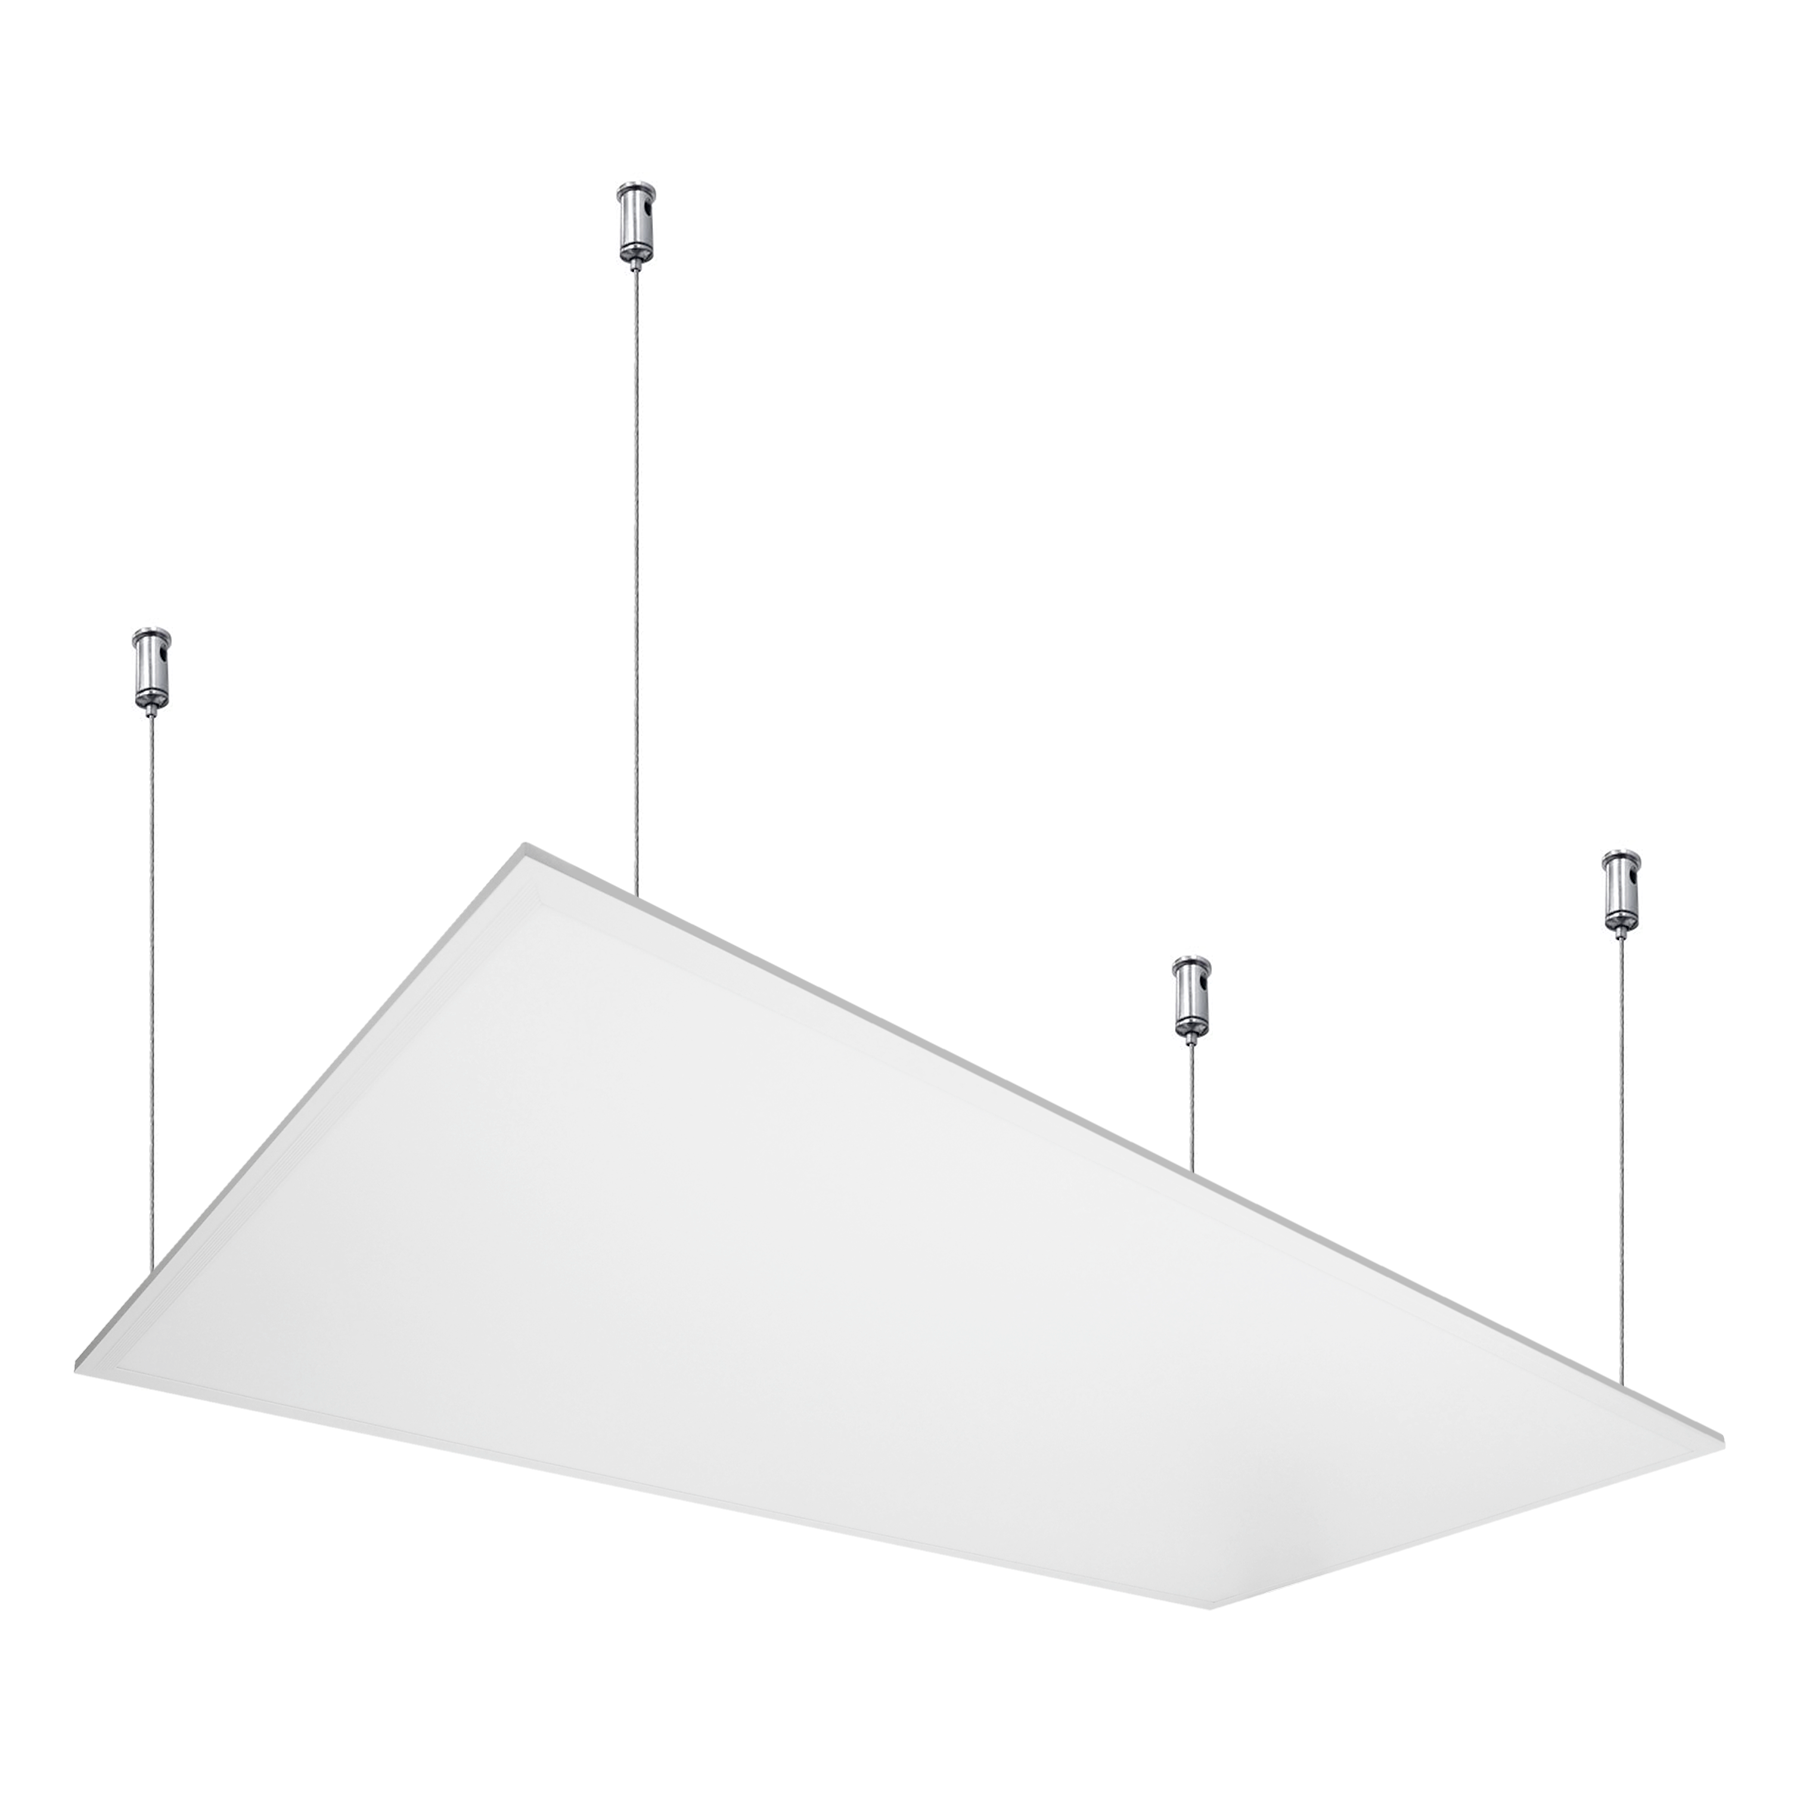 G.W.S LED Wholesale 595x1195mm LED Panel Lights Suspended (With Wire Kit) / Neutral White (4000K) / No 595x1195mm 84W White Frame LED Panel Light